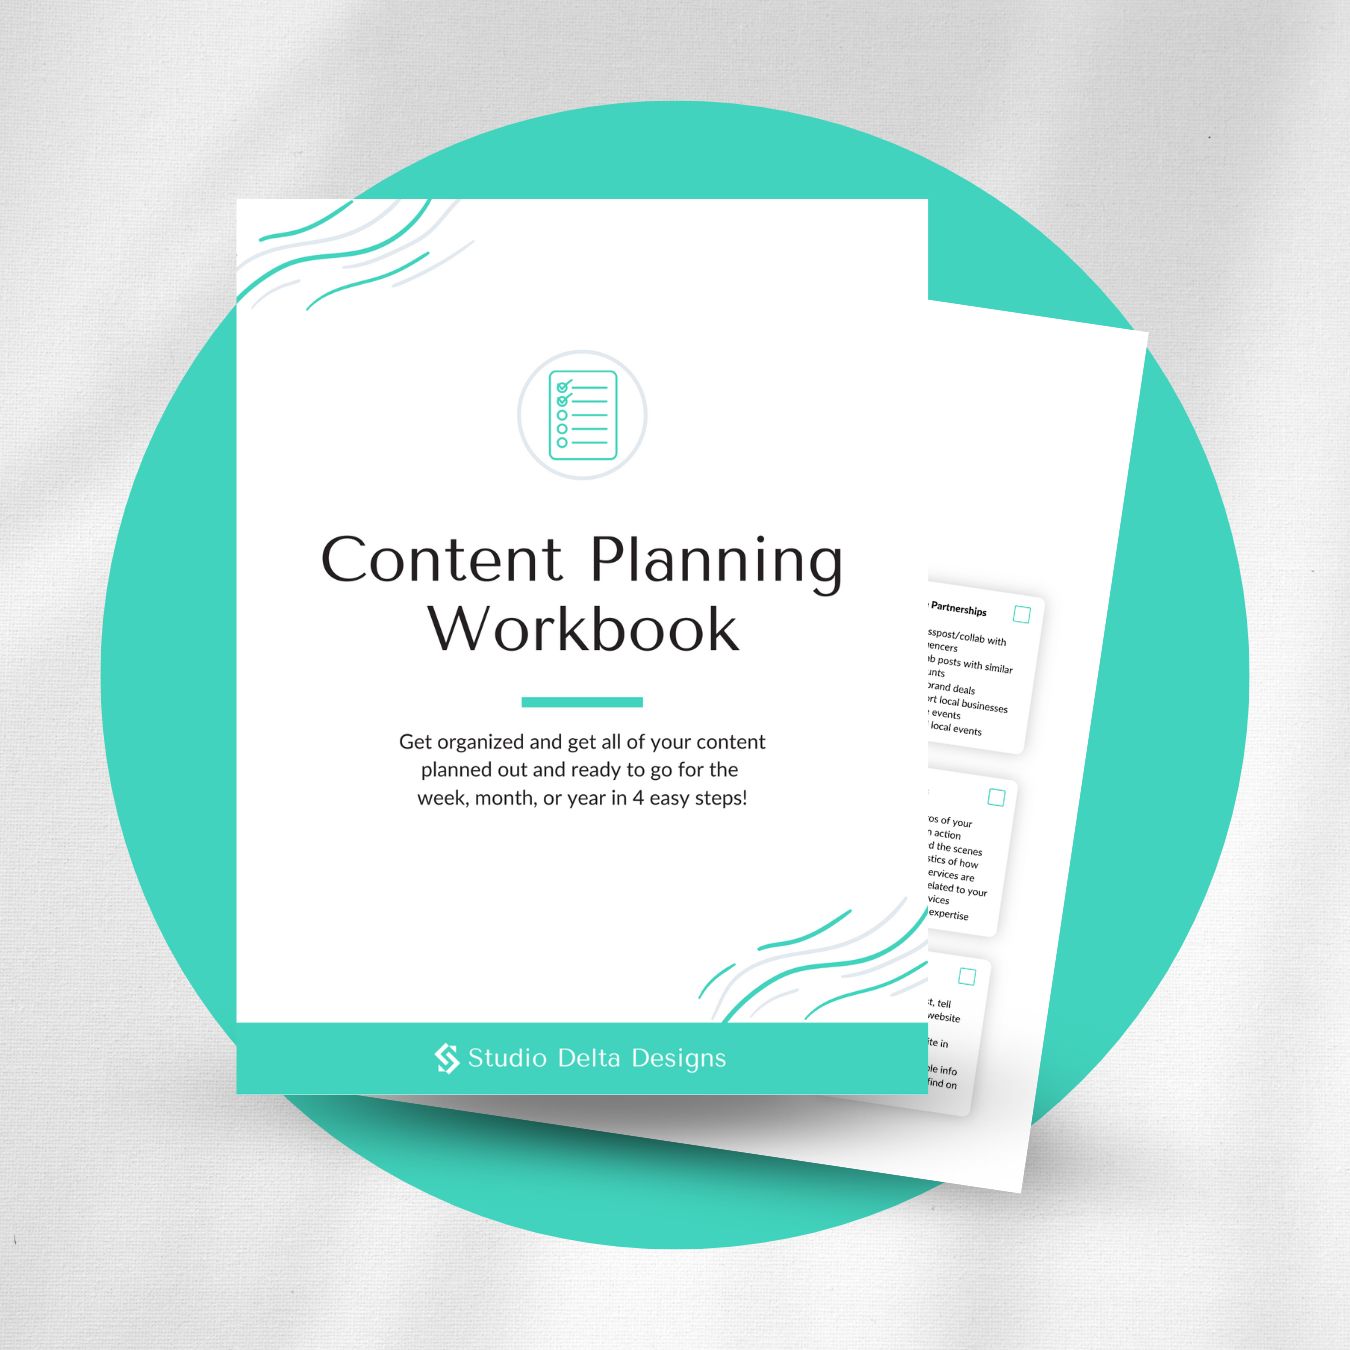 Content Planning Toolkit from Studio Delta Designs plan your social media content easily